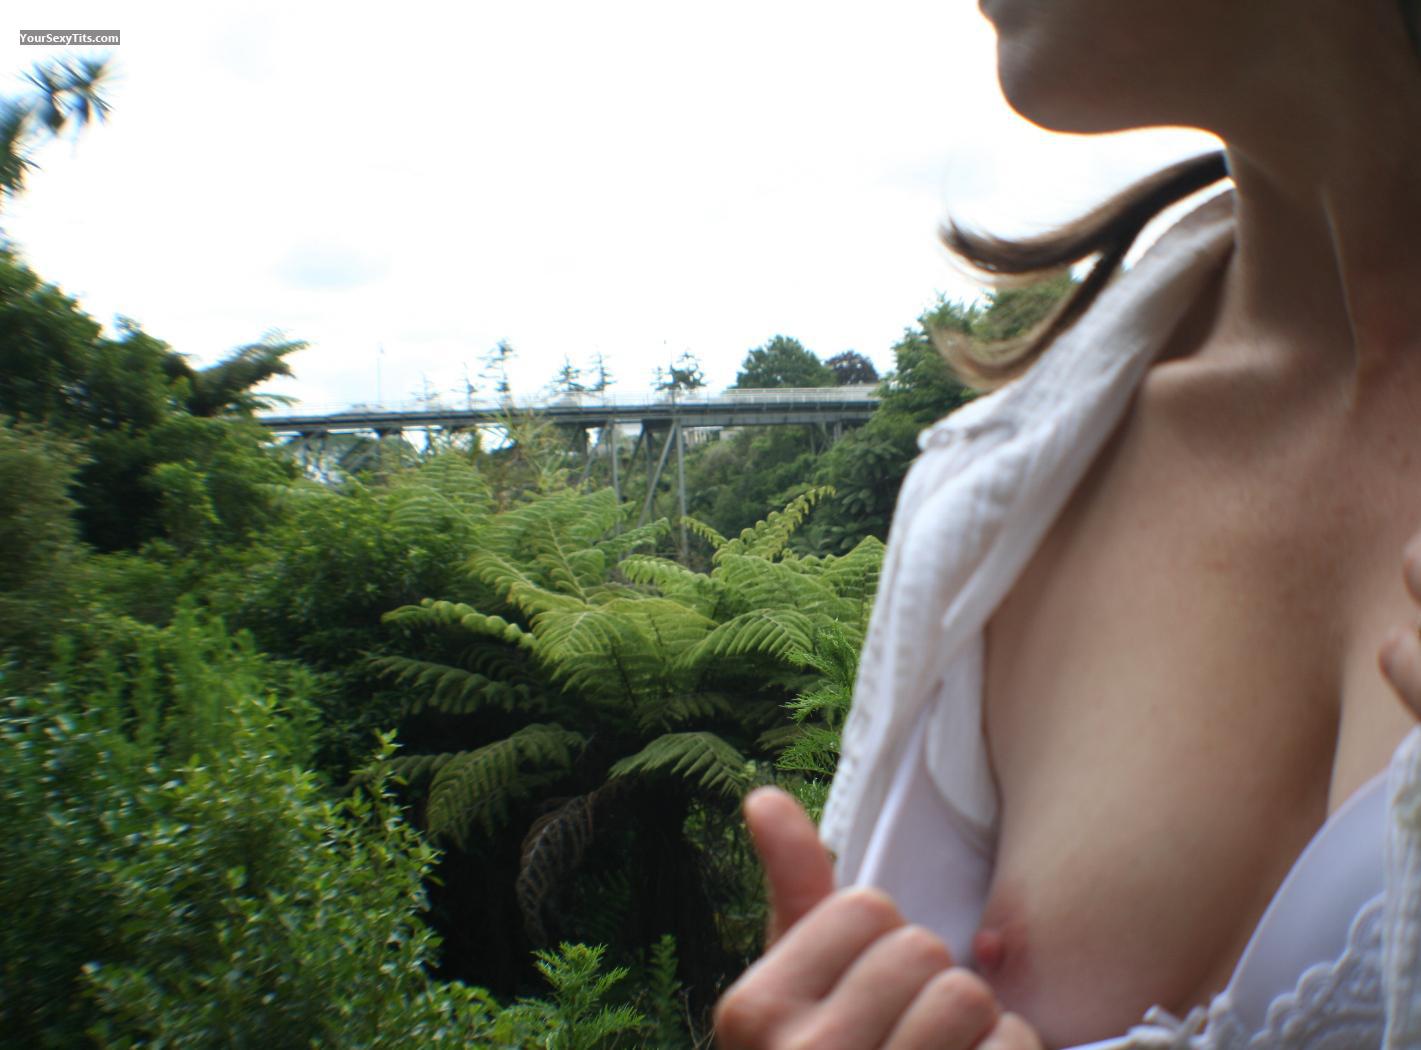 Tit Flash: My Very Small Tits - Palmy Gurl from New Zealand